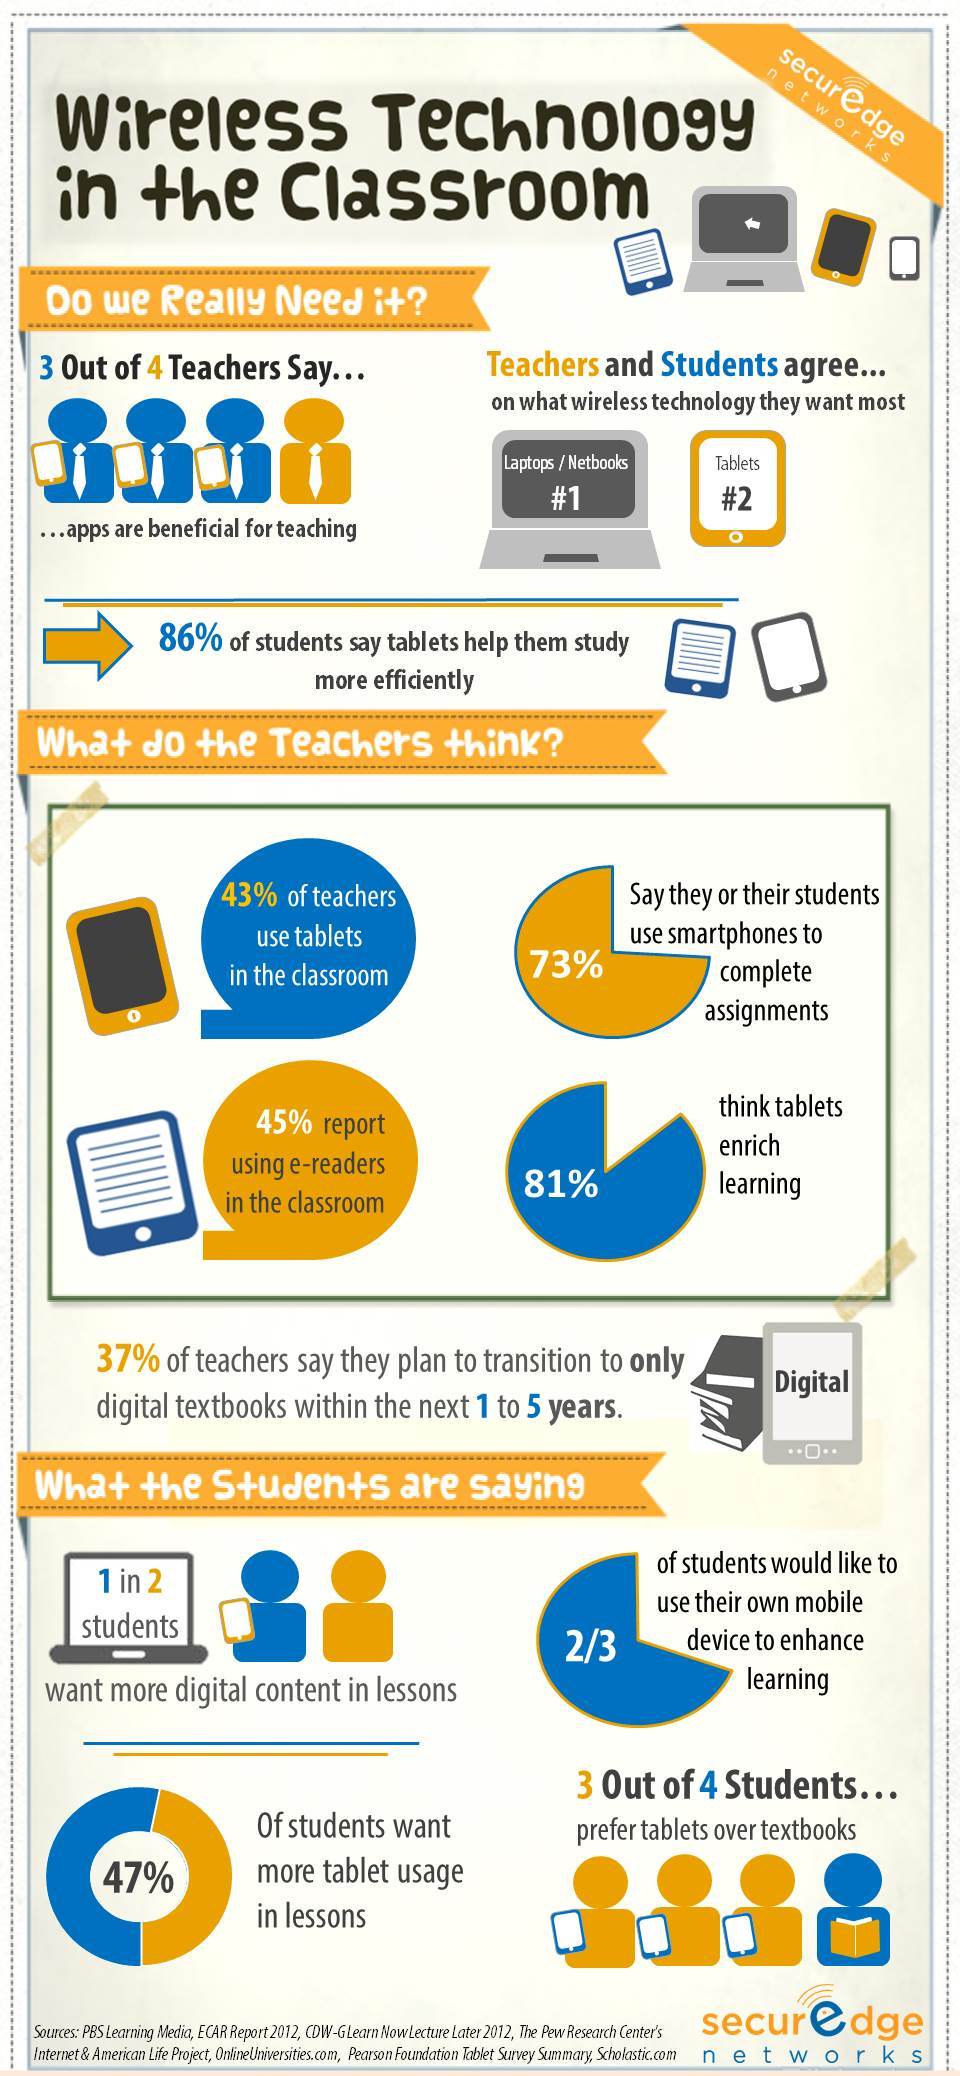 Wireless Technology in the Classroom 101: Infographic